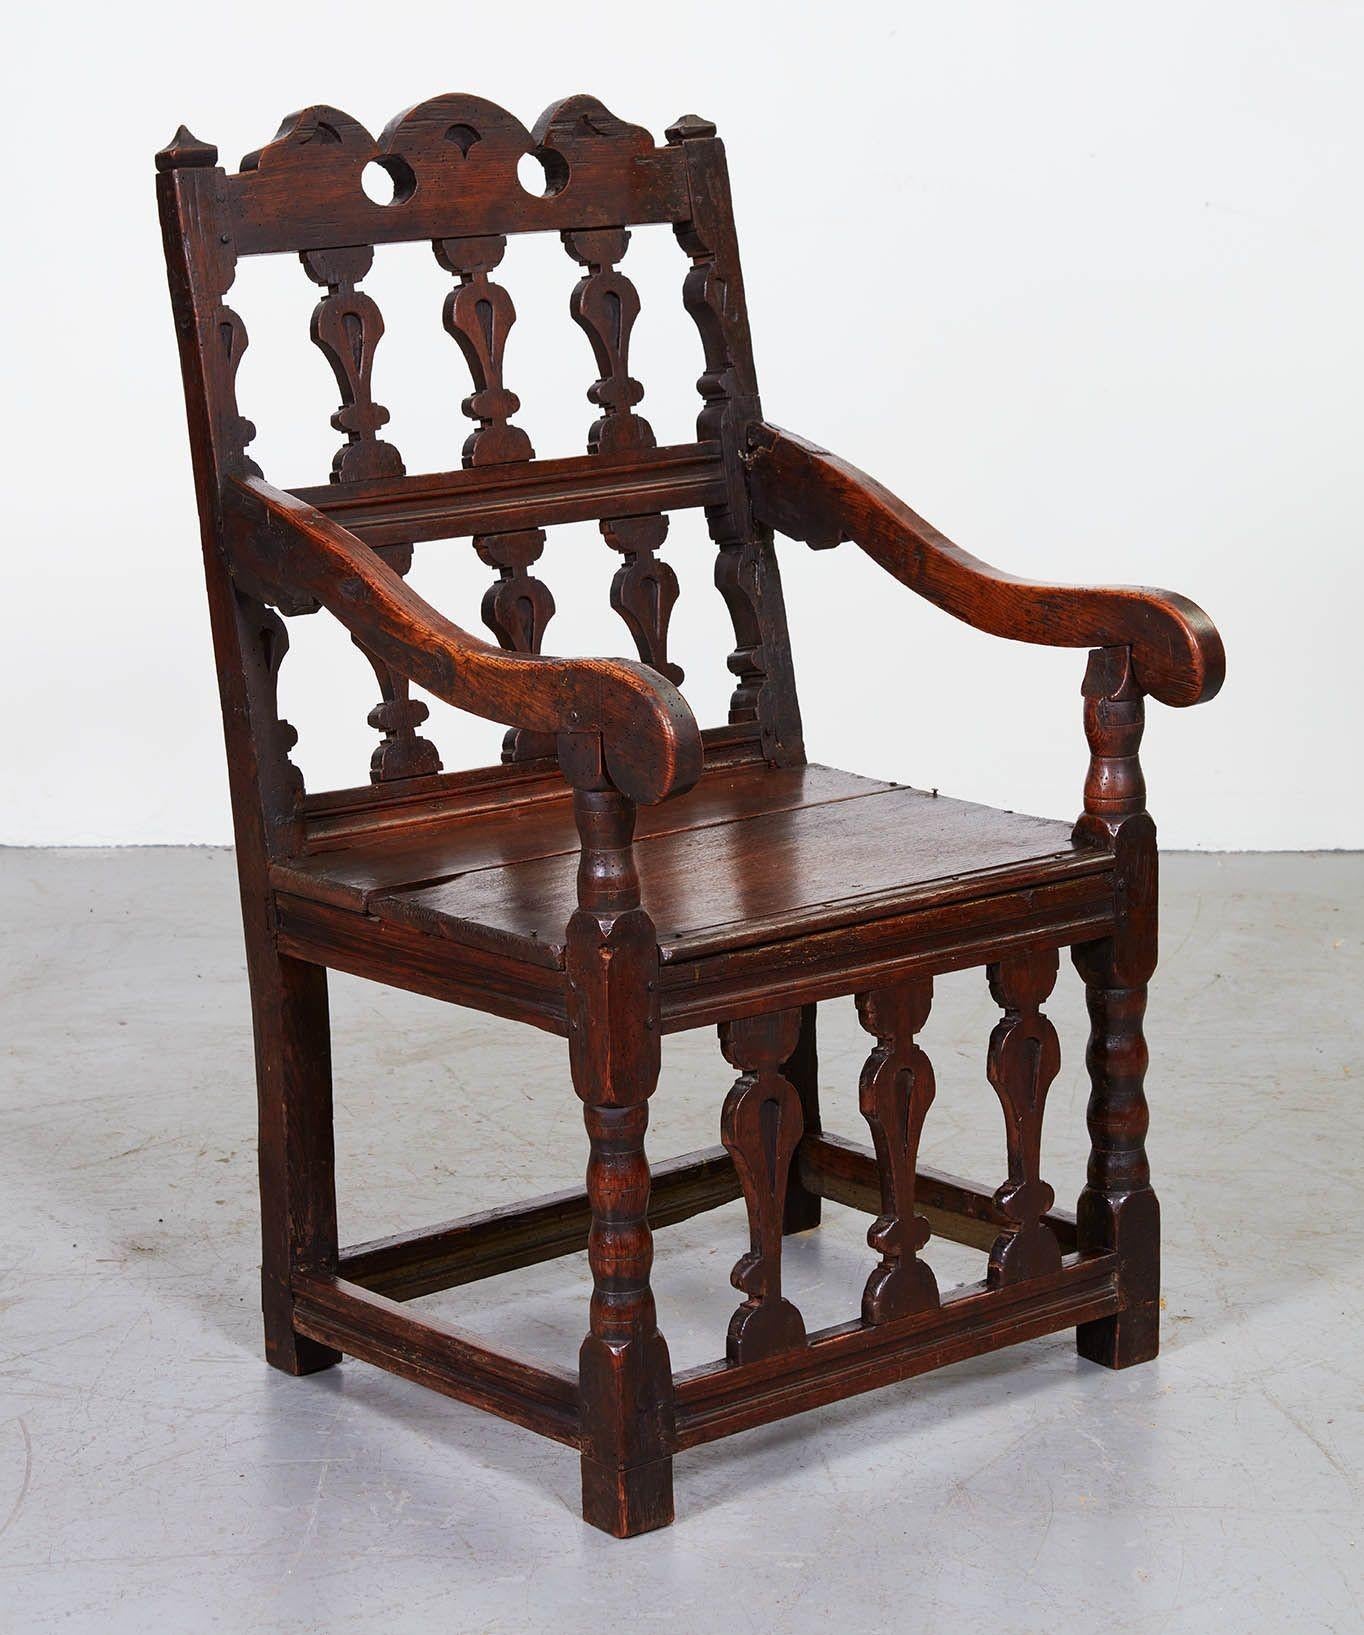 A splendid early Abbot's chair in dark bog oak with decorative back and apron of vasiform splats and fretwork railing, having shaped arms over a paneled seat and standing on bobbin legs joined by a scribed box stretcher. Impressive scale and